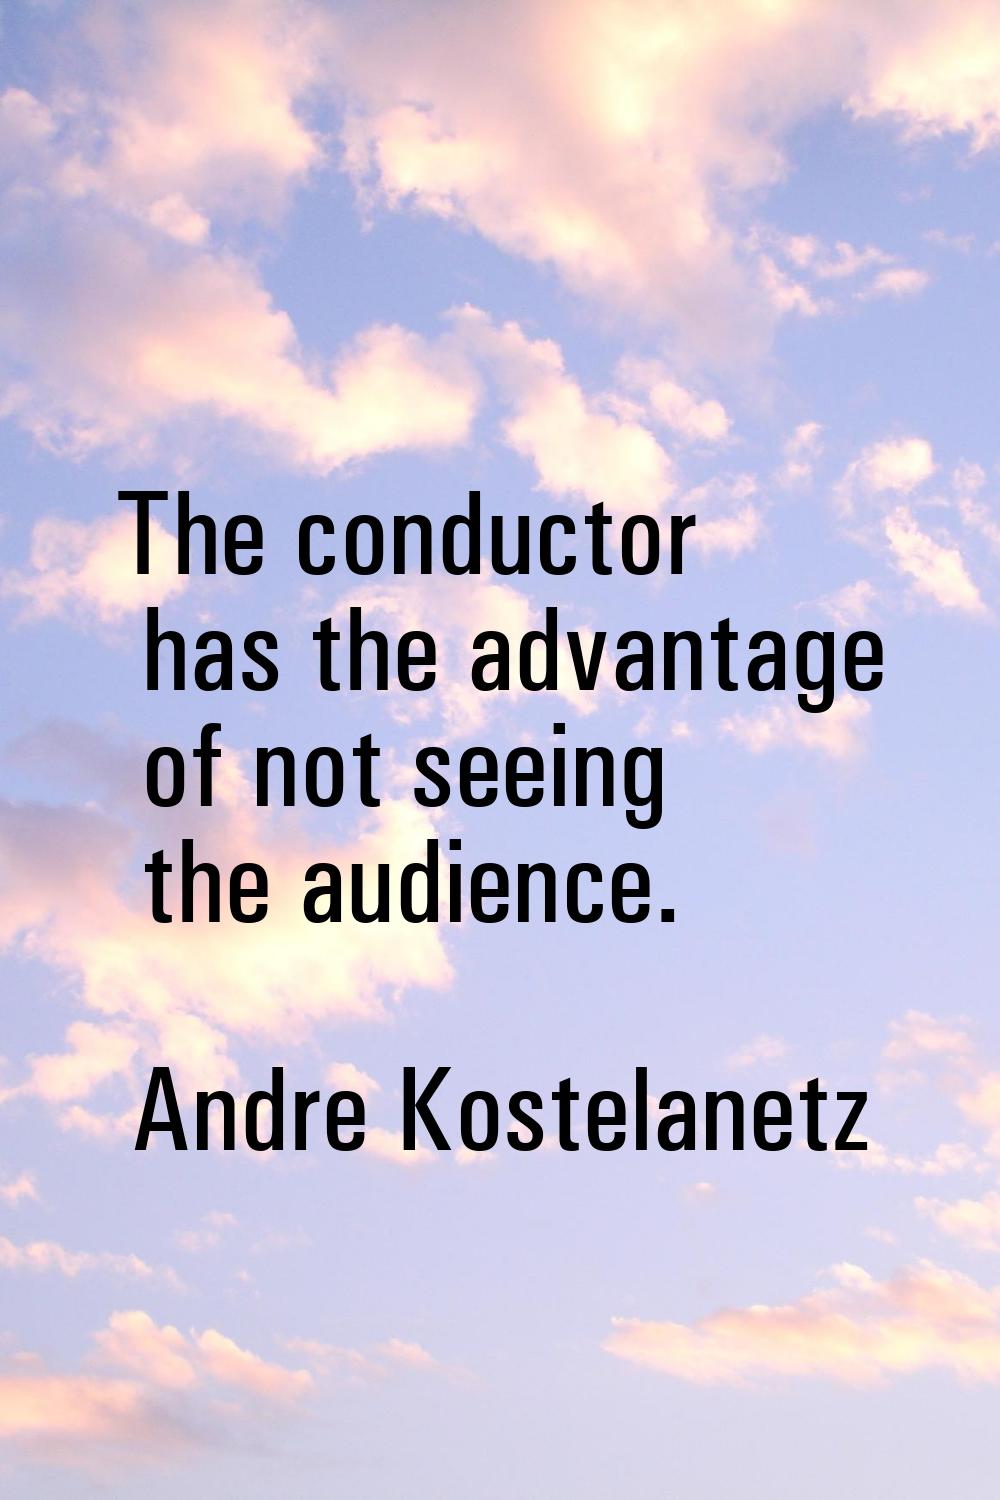 The conductor has the advantage of not seeing the audience.